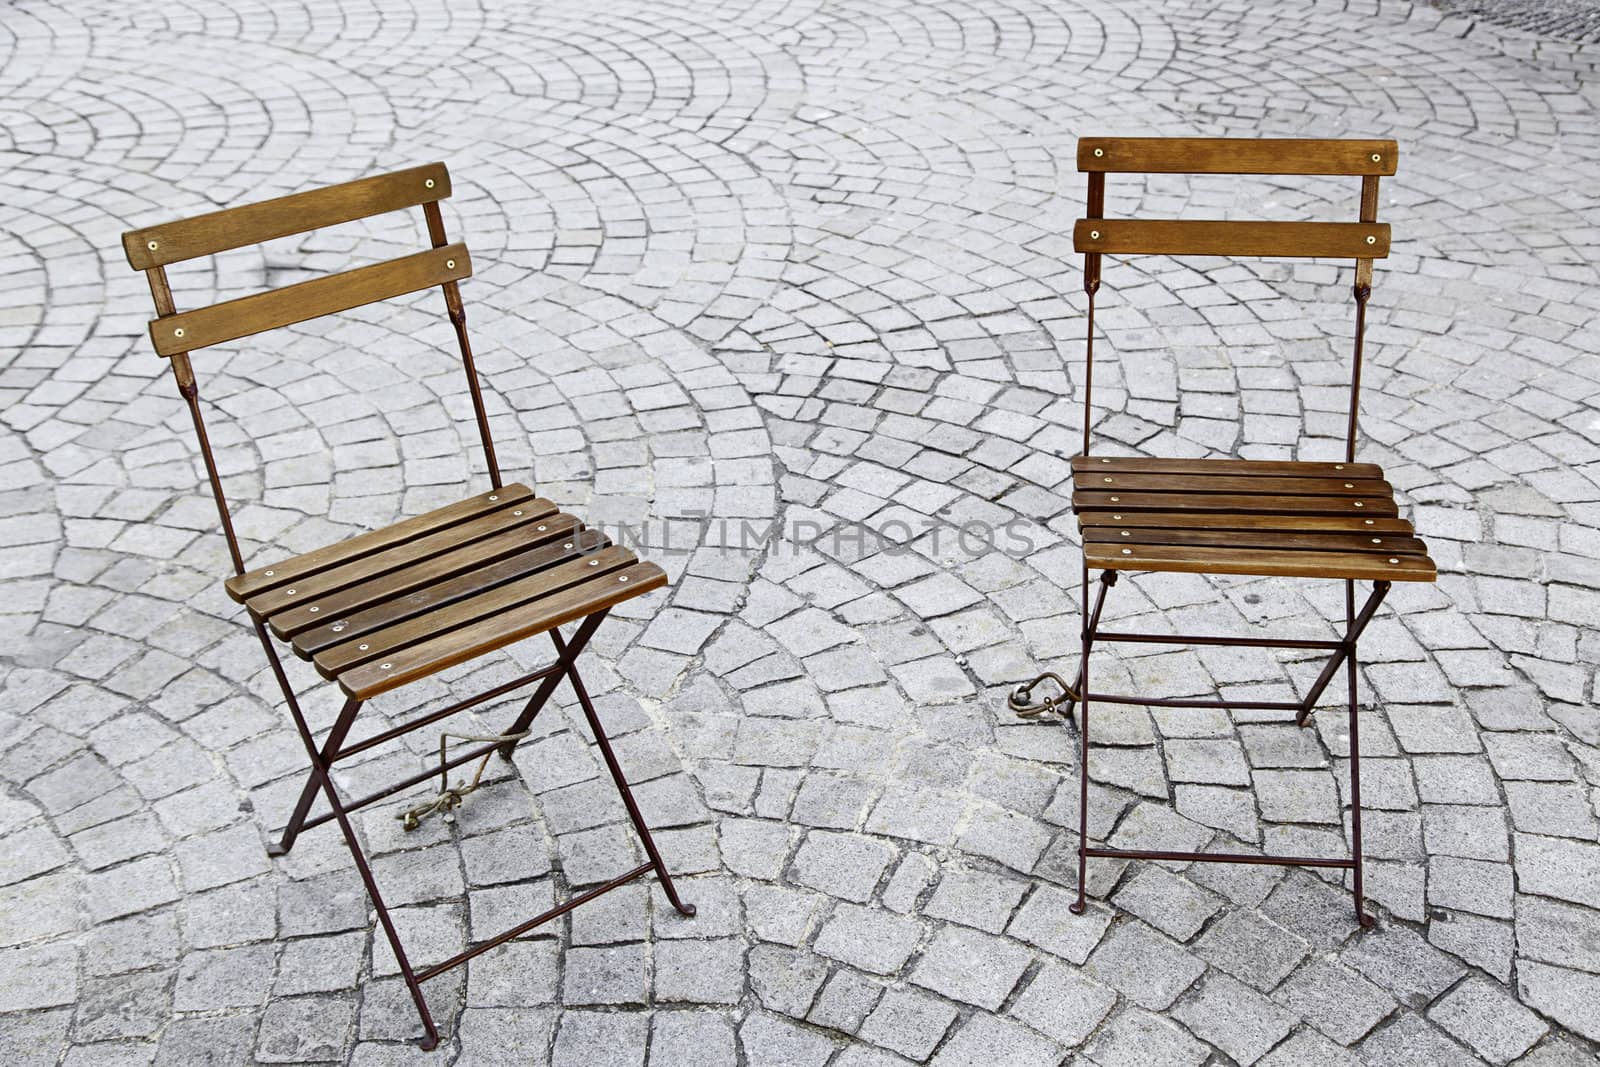 Chairs in the park, two chairs in a square in a town of Portugal, Europe